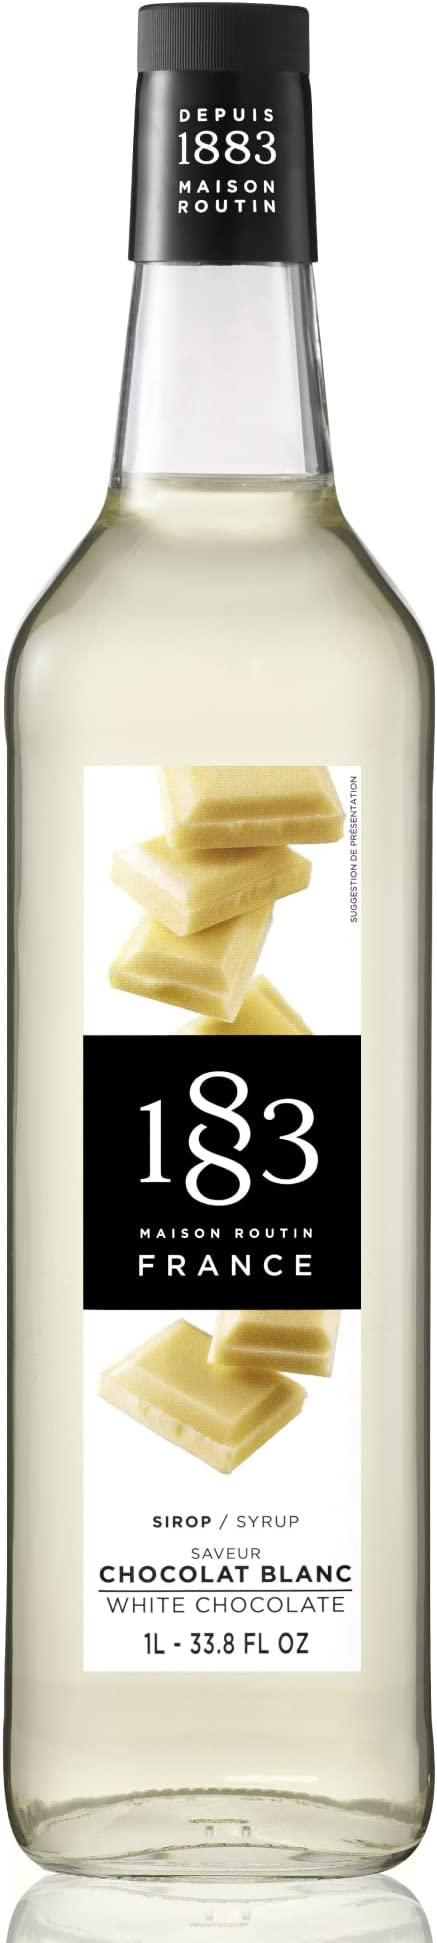 1883 Maison Routin Syrup - 1 Litre Glass Bottle - White Chocolate Flavour - Vending Superstore